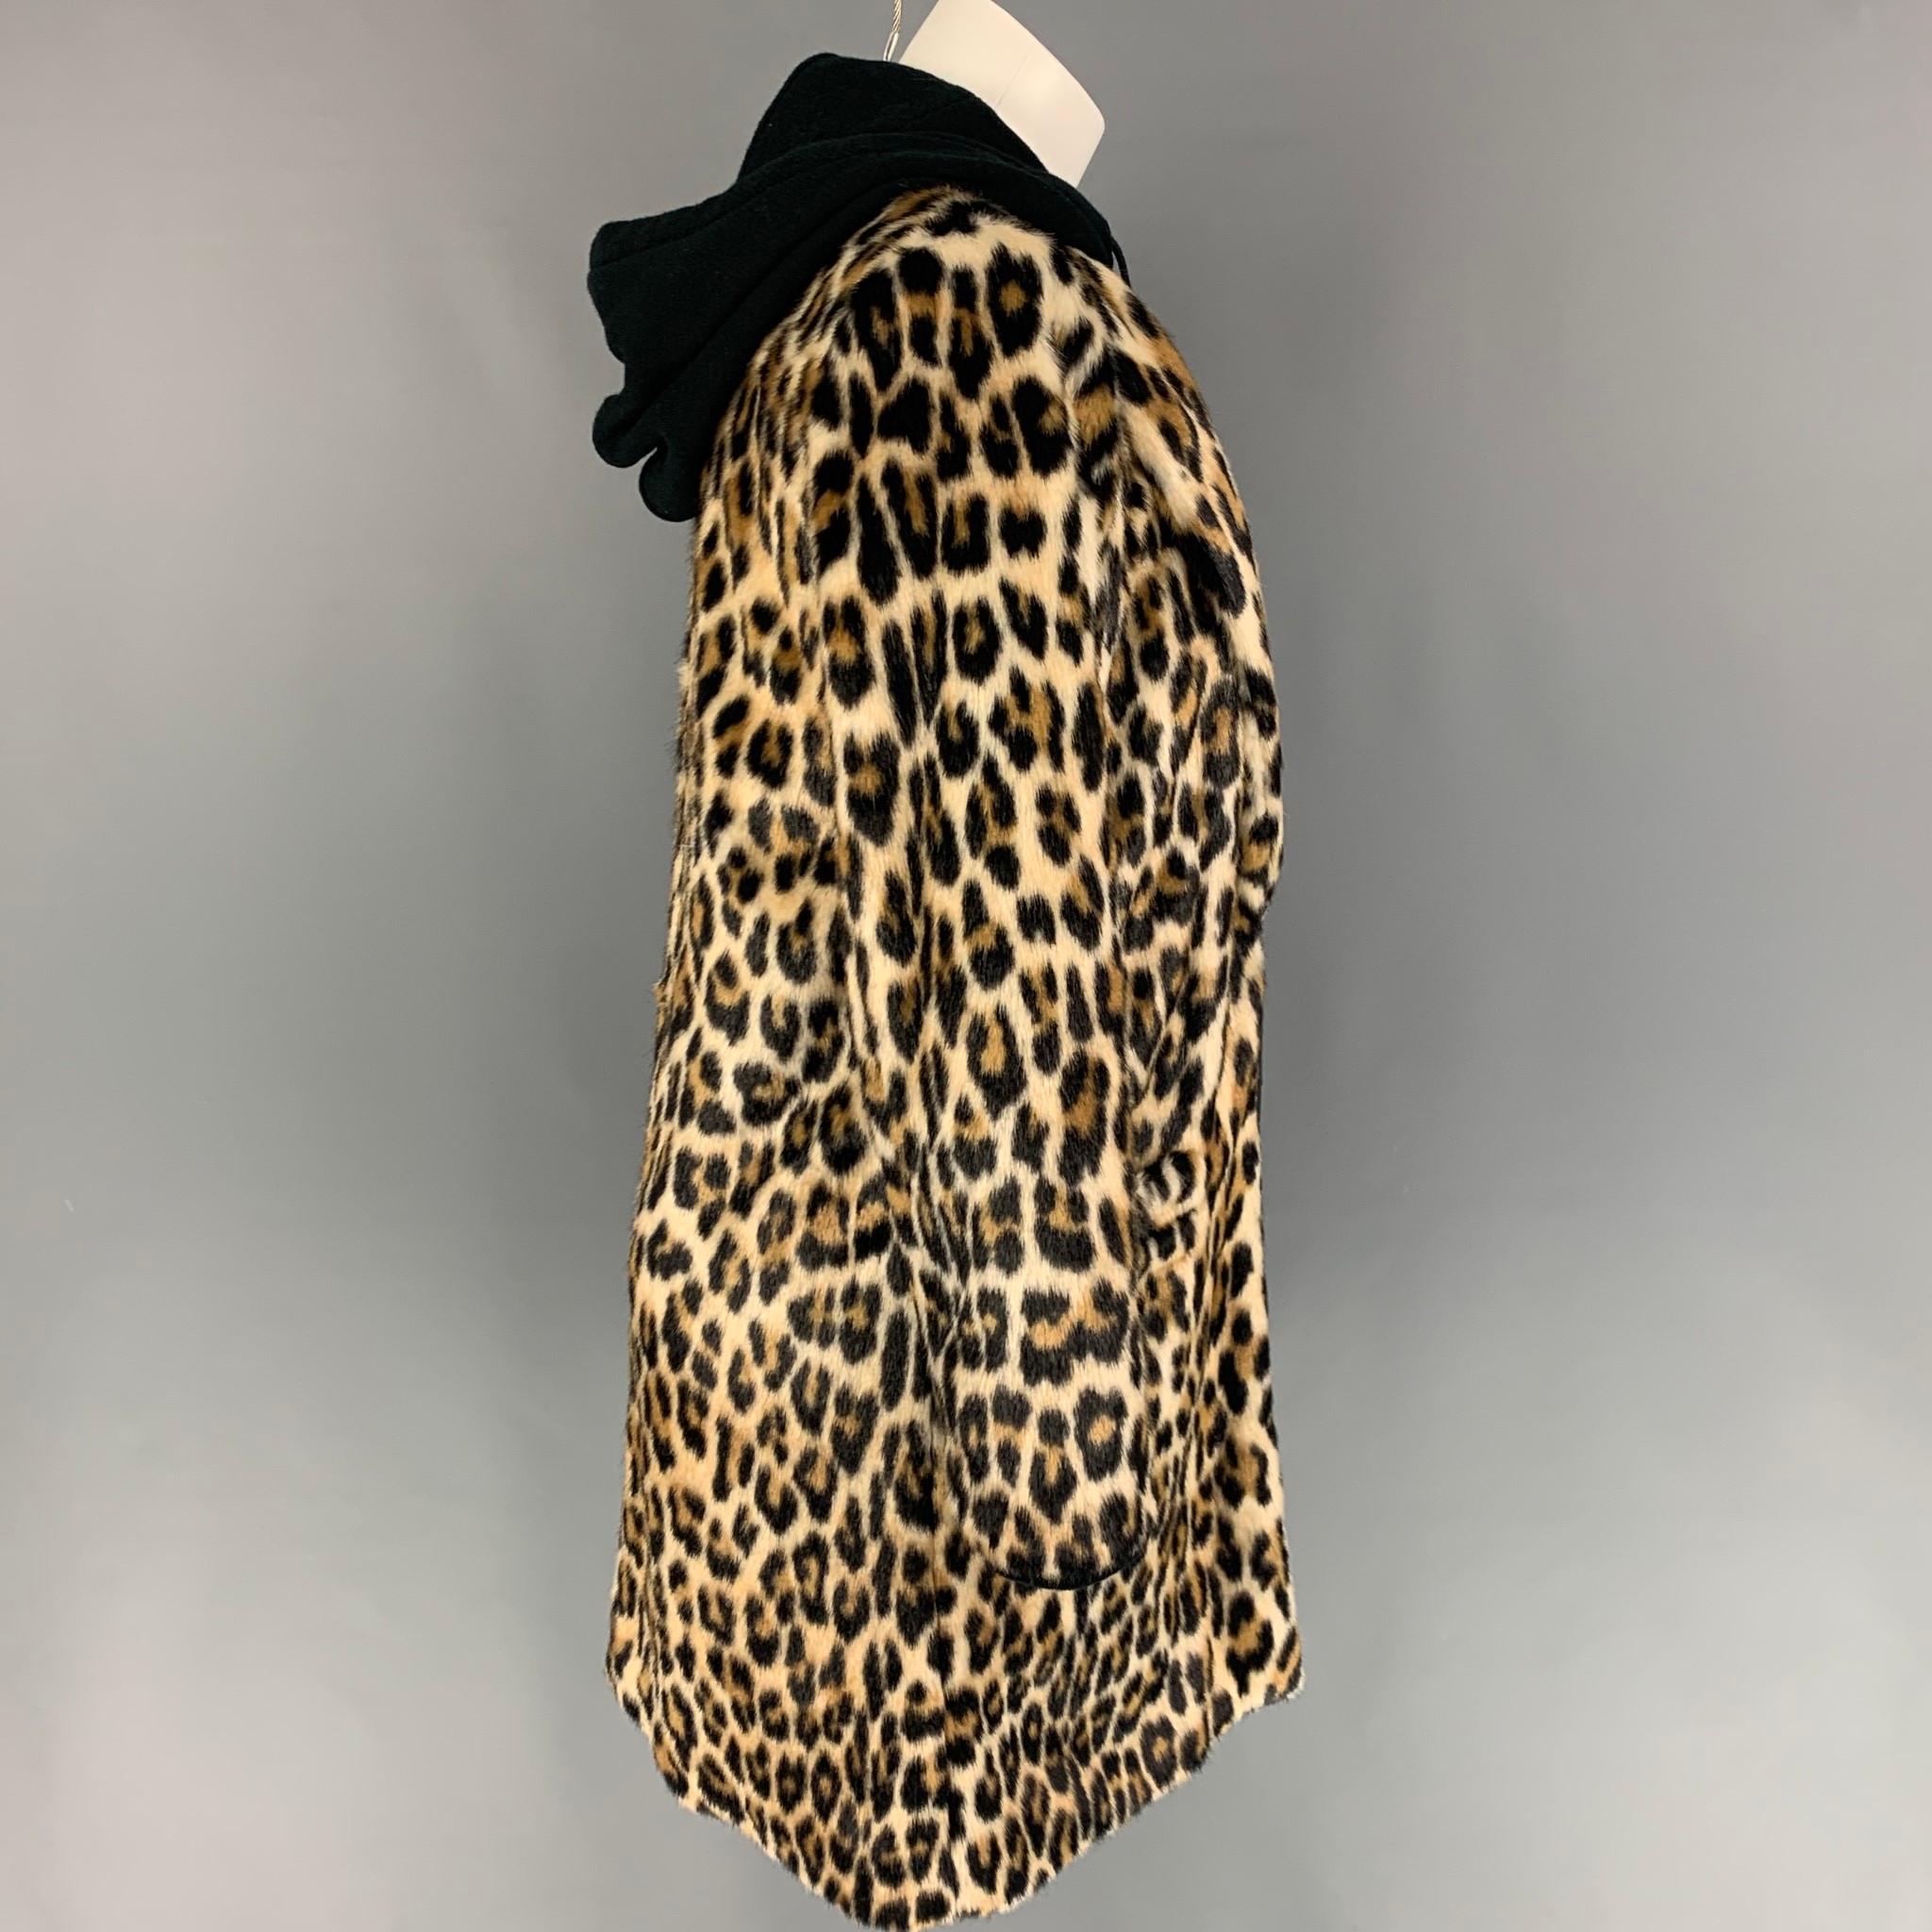 ALICE + OLIVIA coat comes in a black & beige animal print faux fur acrylic / cotton featuring a removable zip-up panel, patch pockets, and a hook & loop closure. 

Very Good Pre-Owned Condition.
Marked: XS
Original Retail Price: